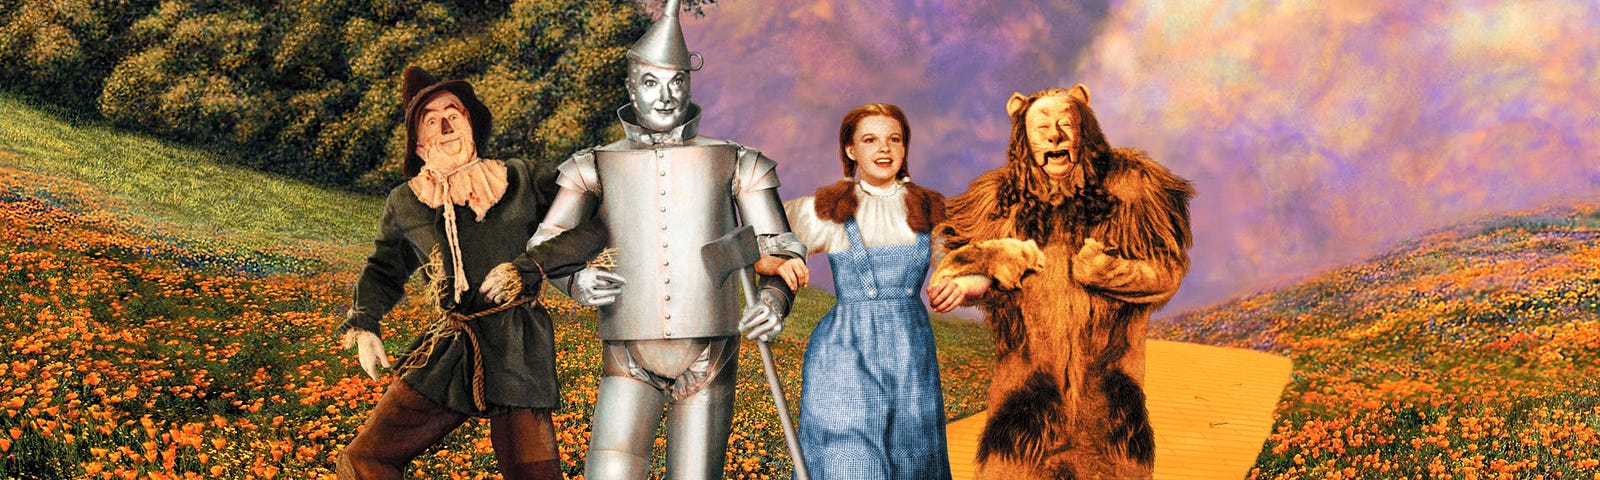 A still shot from the Wizard of Oz, with Dorothy on the yellow brick road.